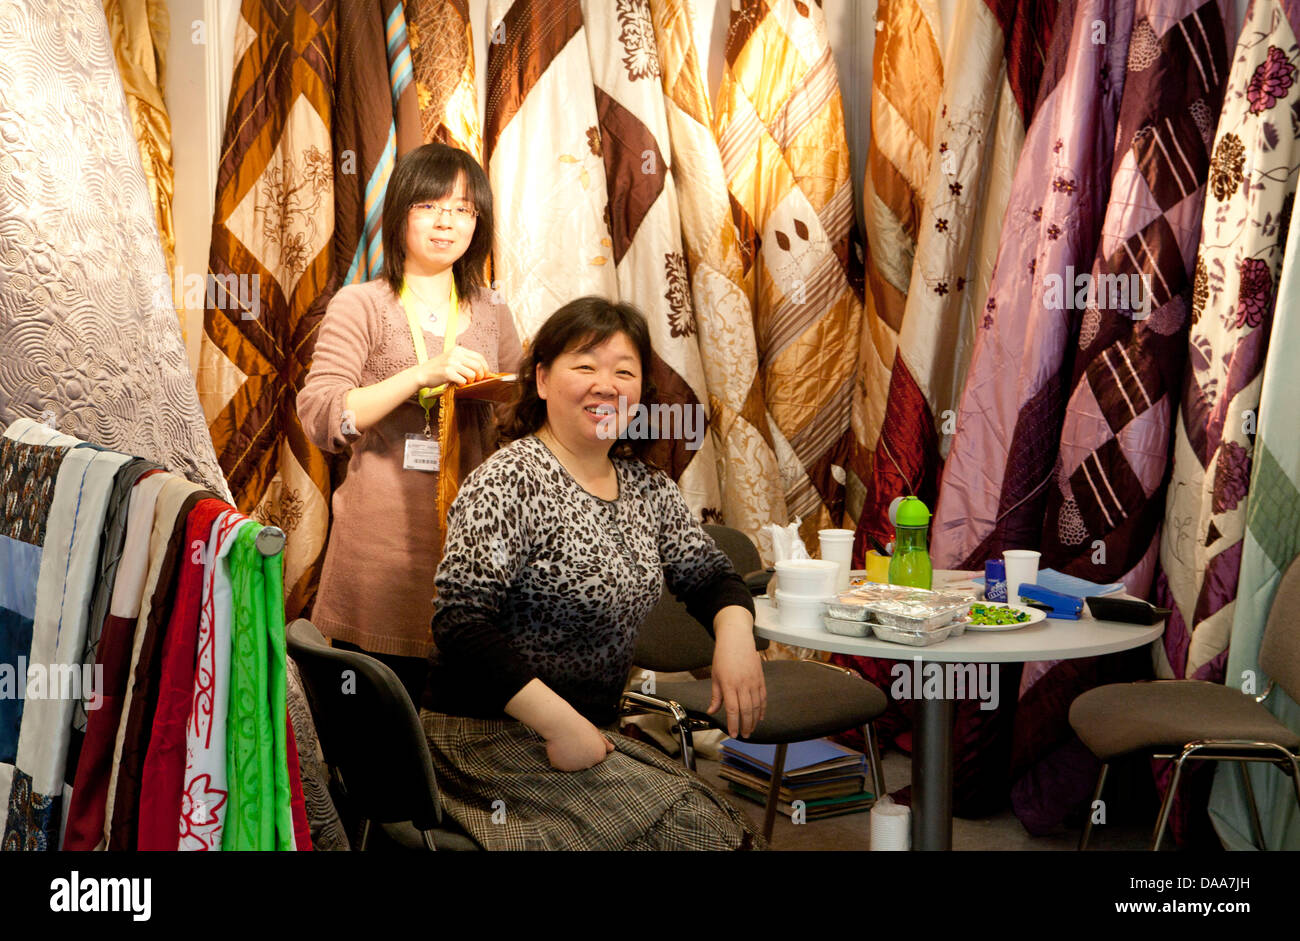 Employees of the Qingdao Sylin Textiles company of China sit at their company's booth at the 'Heimtex' consumer goods and textile trade fair in Frankfurt Main, Germany, 13 January 2011. This year, 2601 exhibitors are present at the fair; 425 companies are from China. Foto: Frank Rumpenhorst Stock Photo